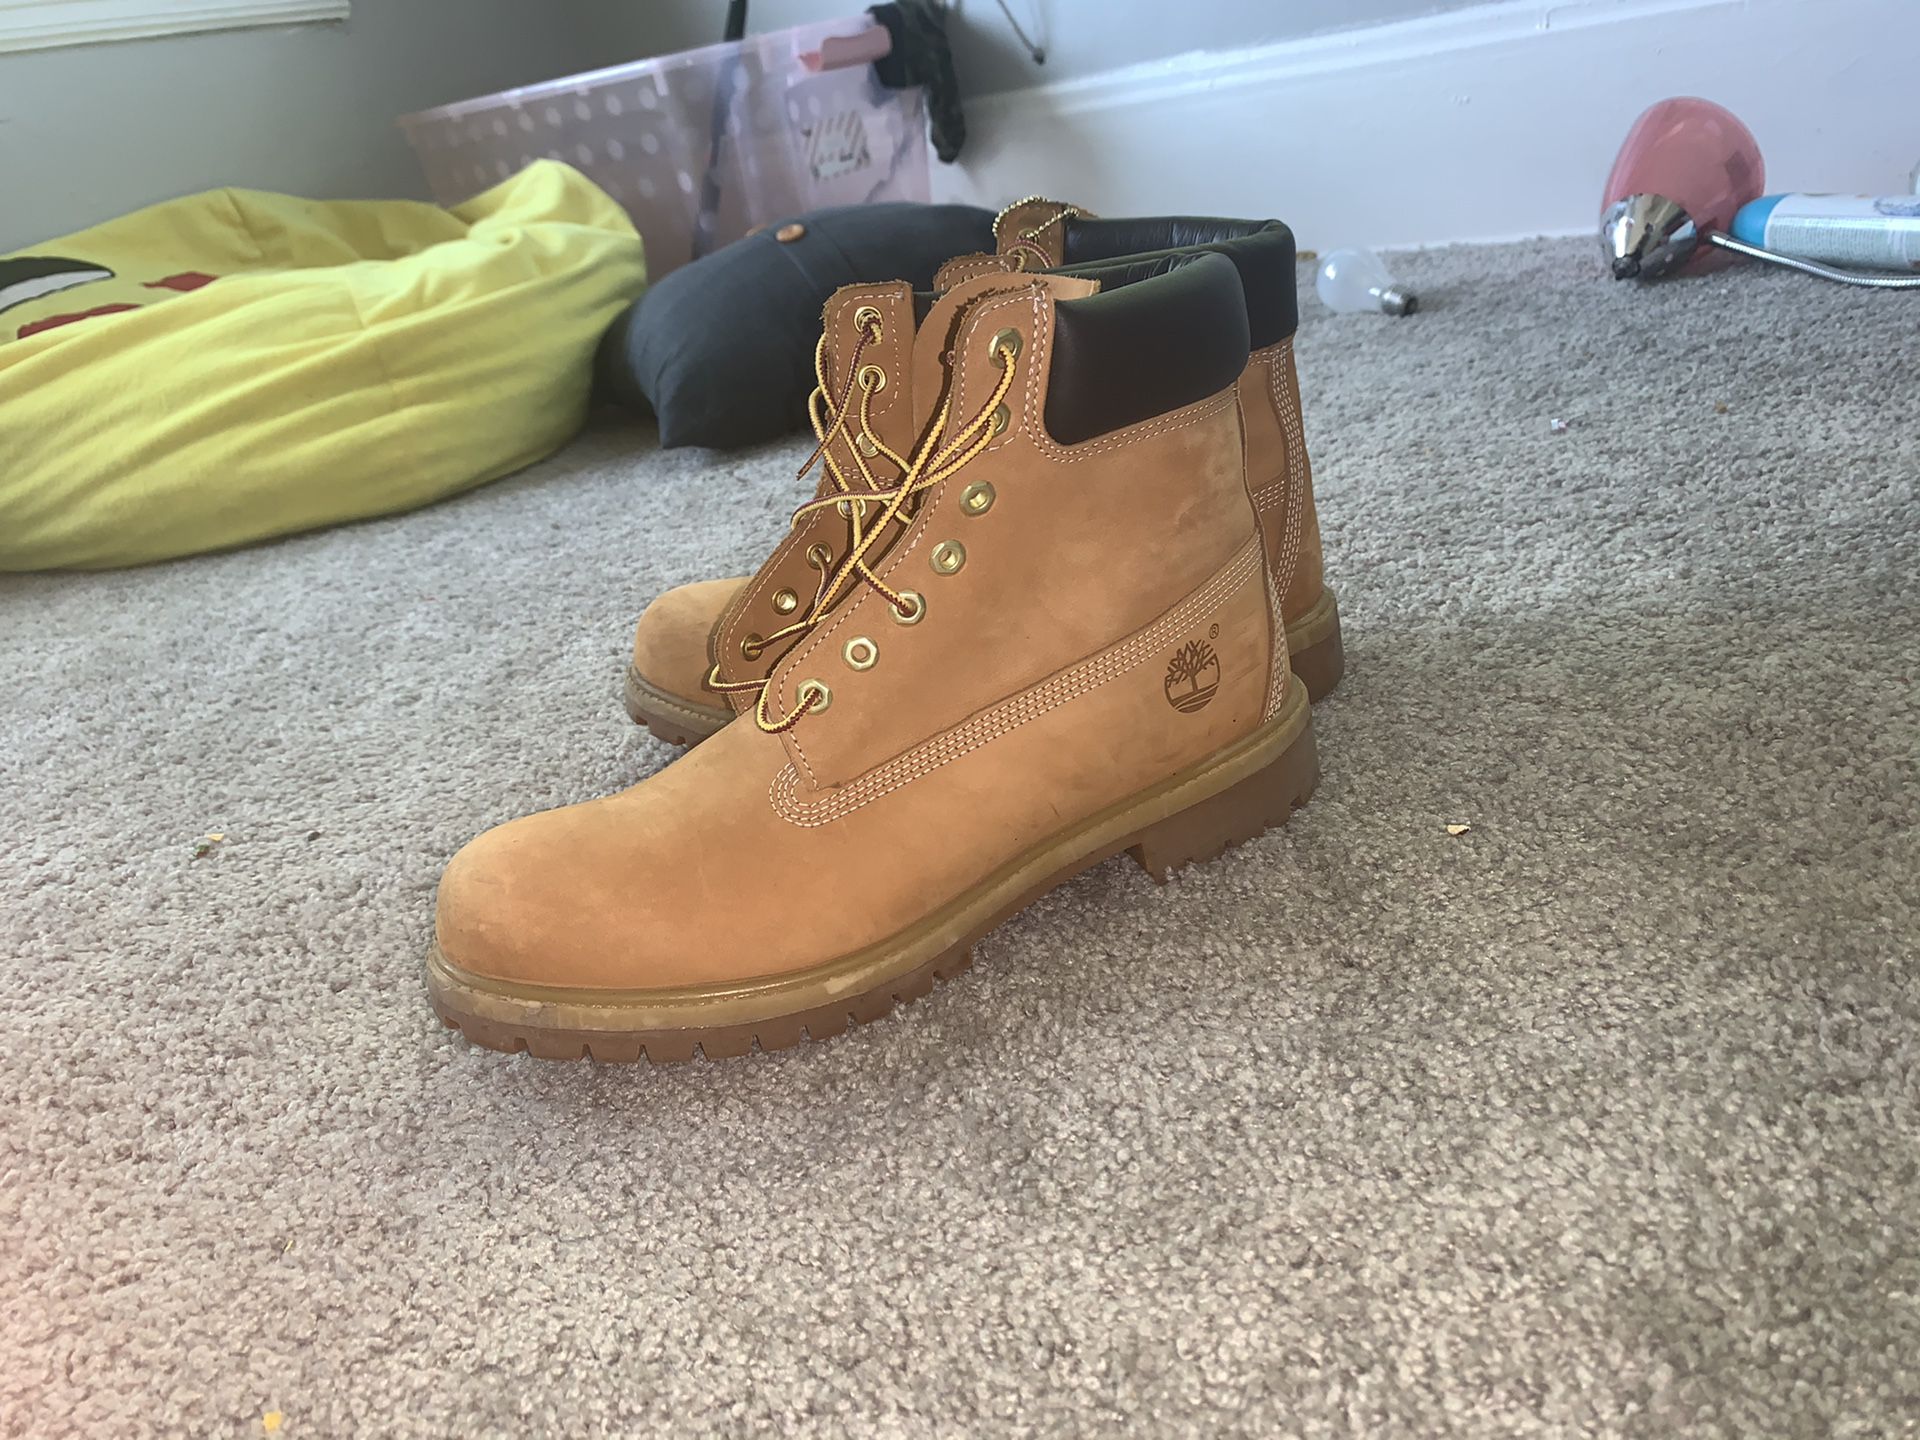 Authentic TIMBERLANDS size 11